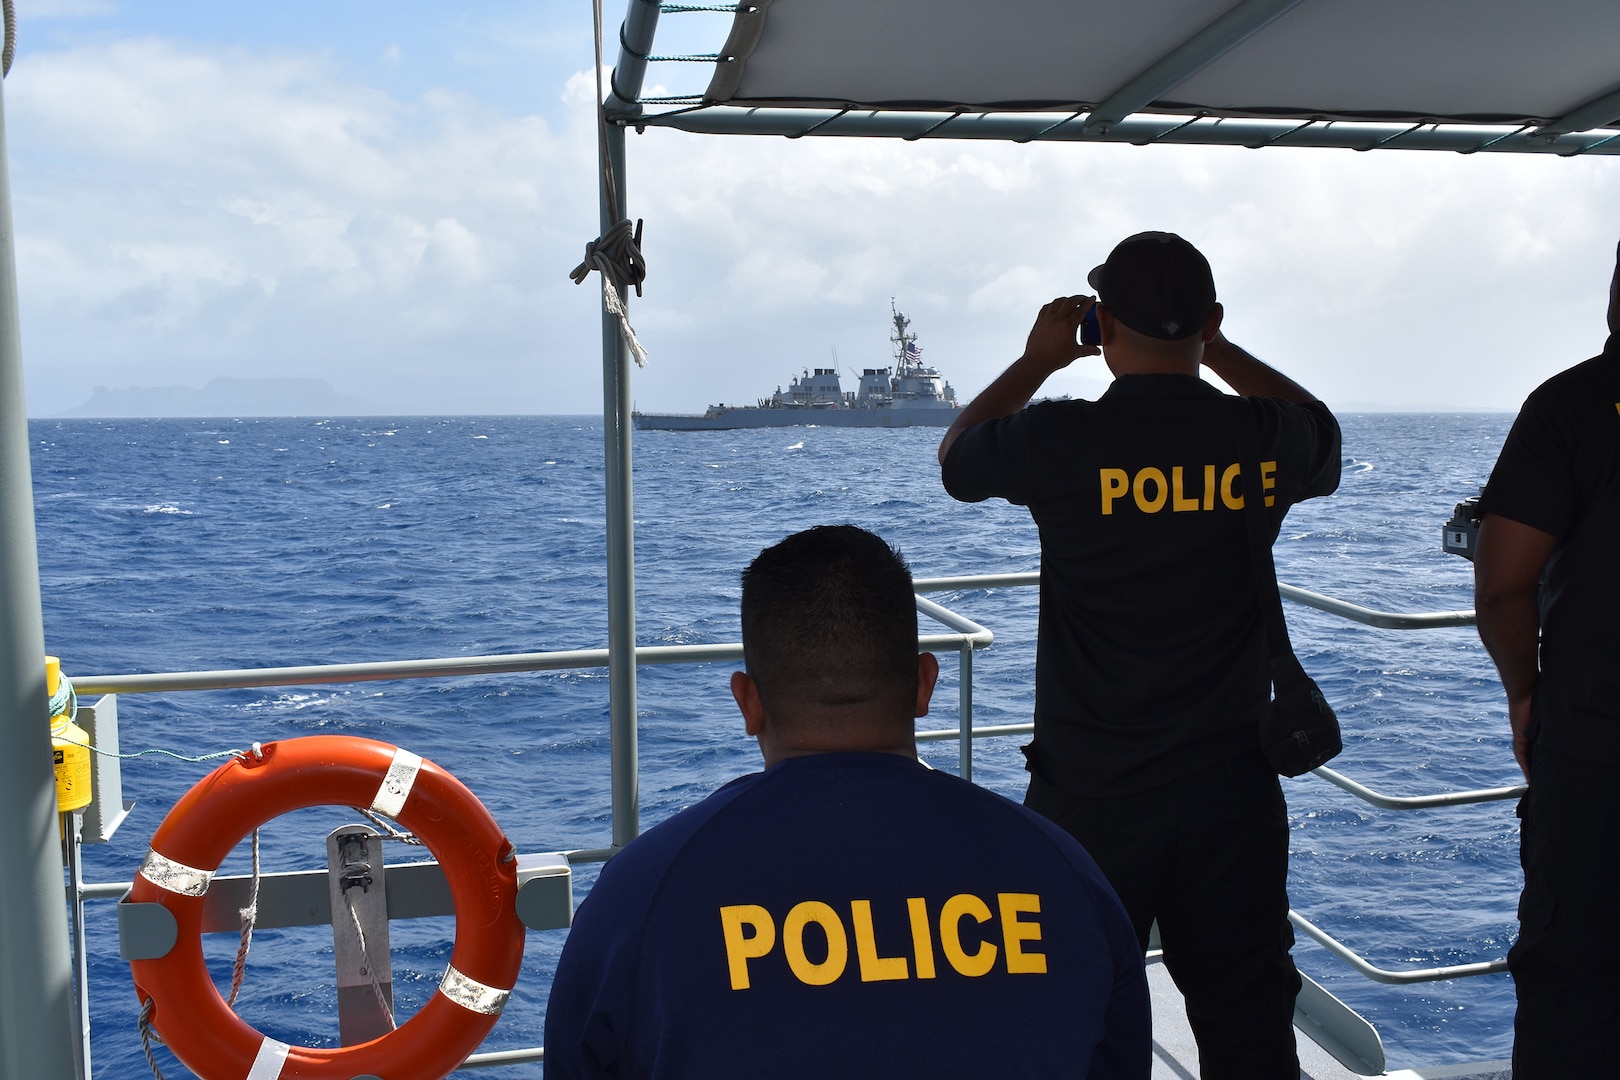 USS Russell engages with partners during Oceania transit